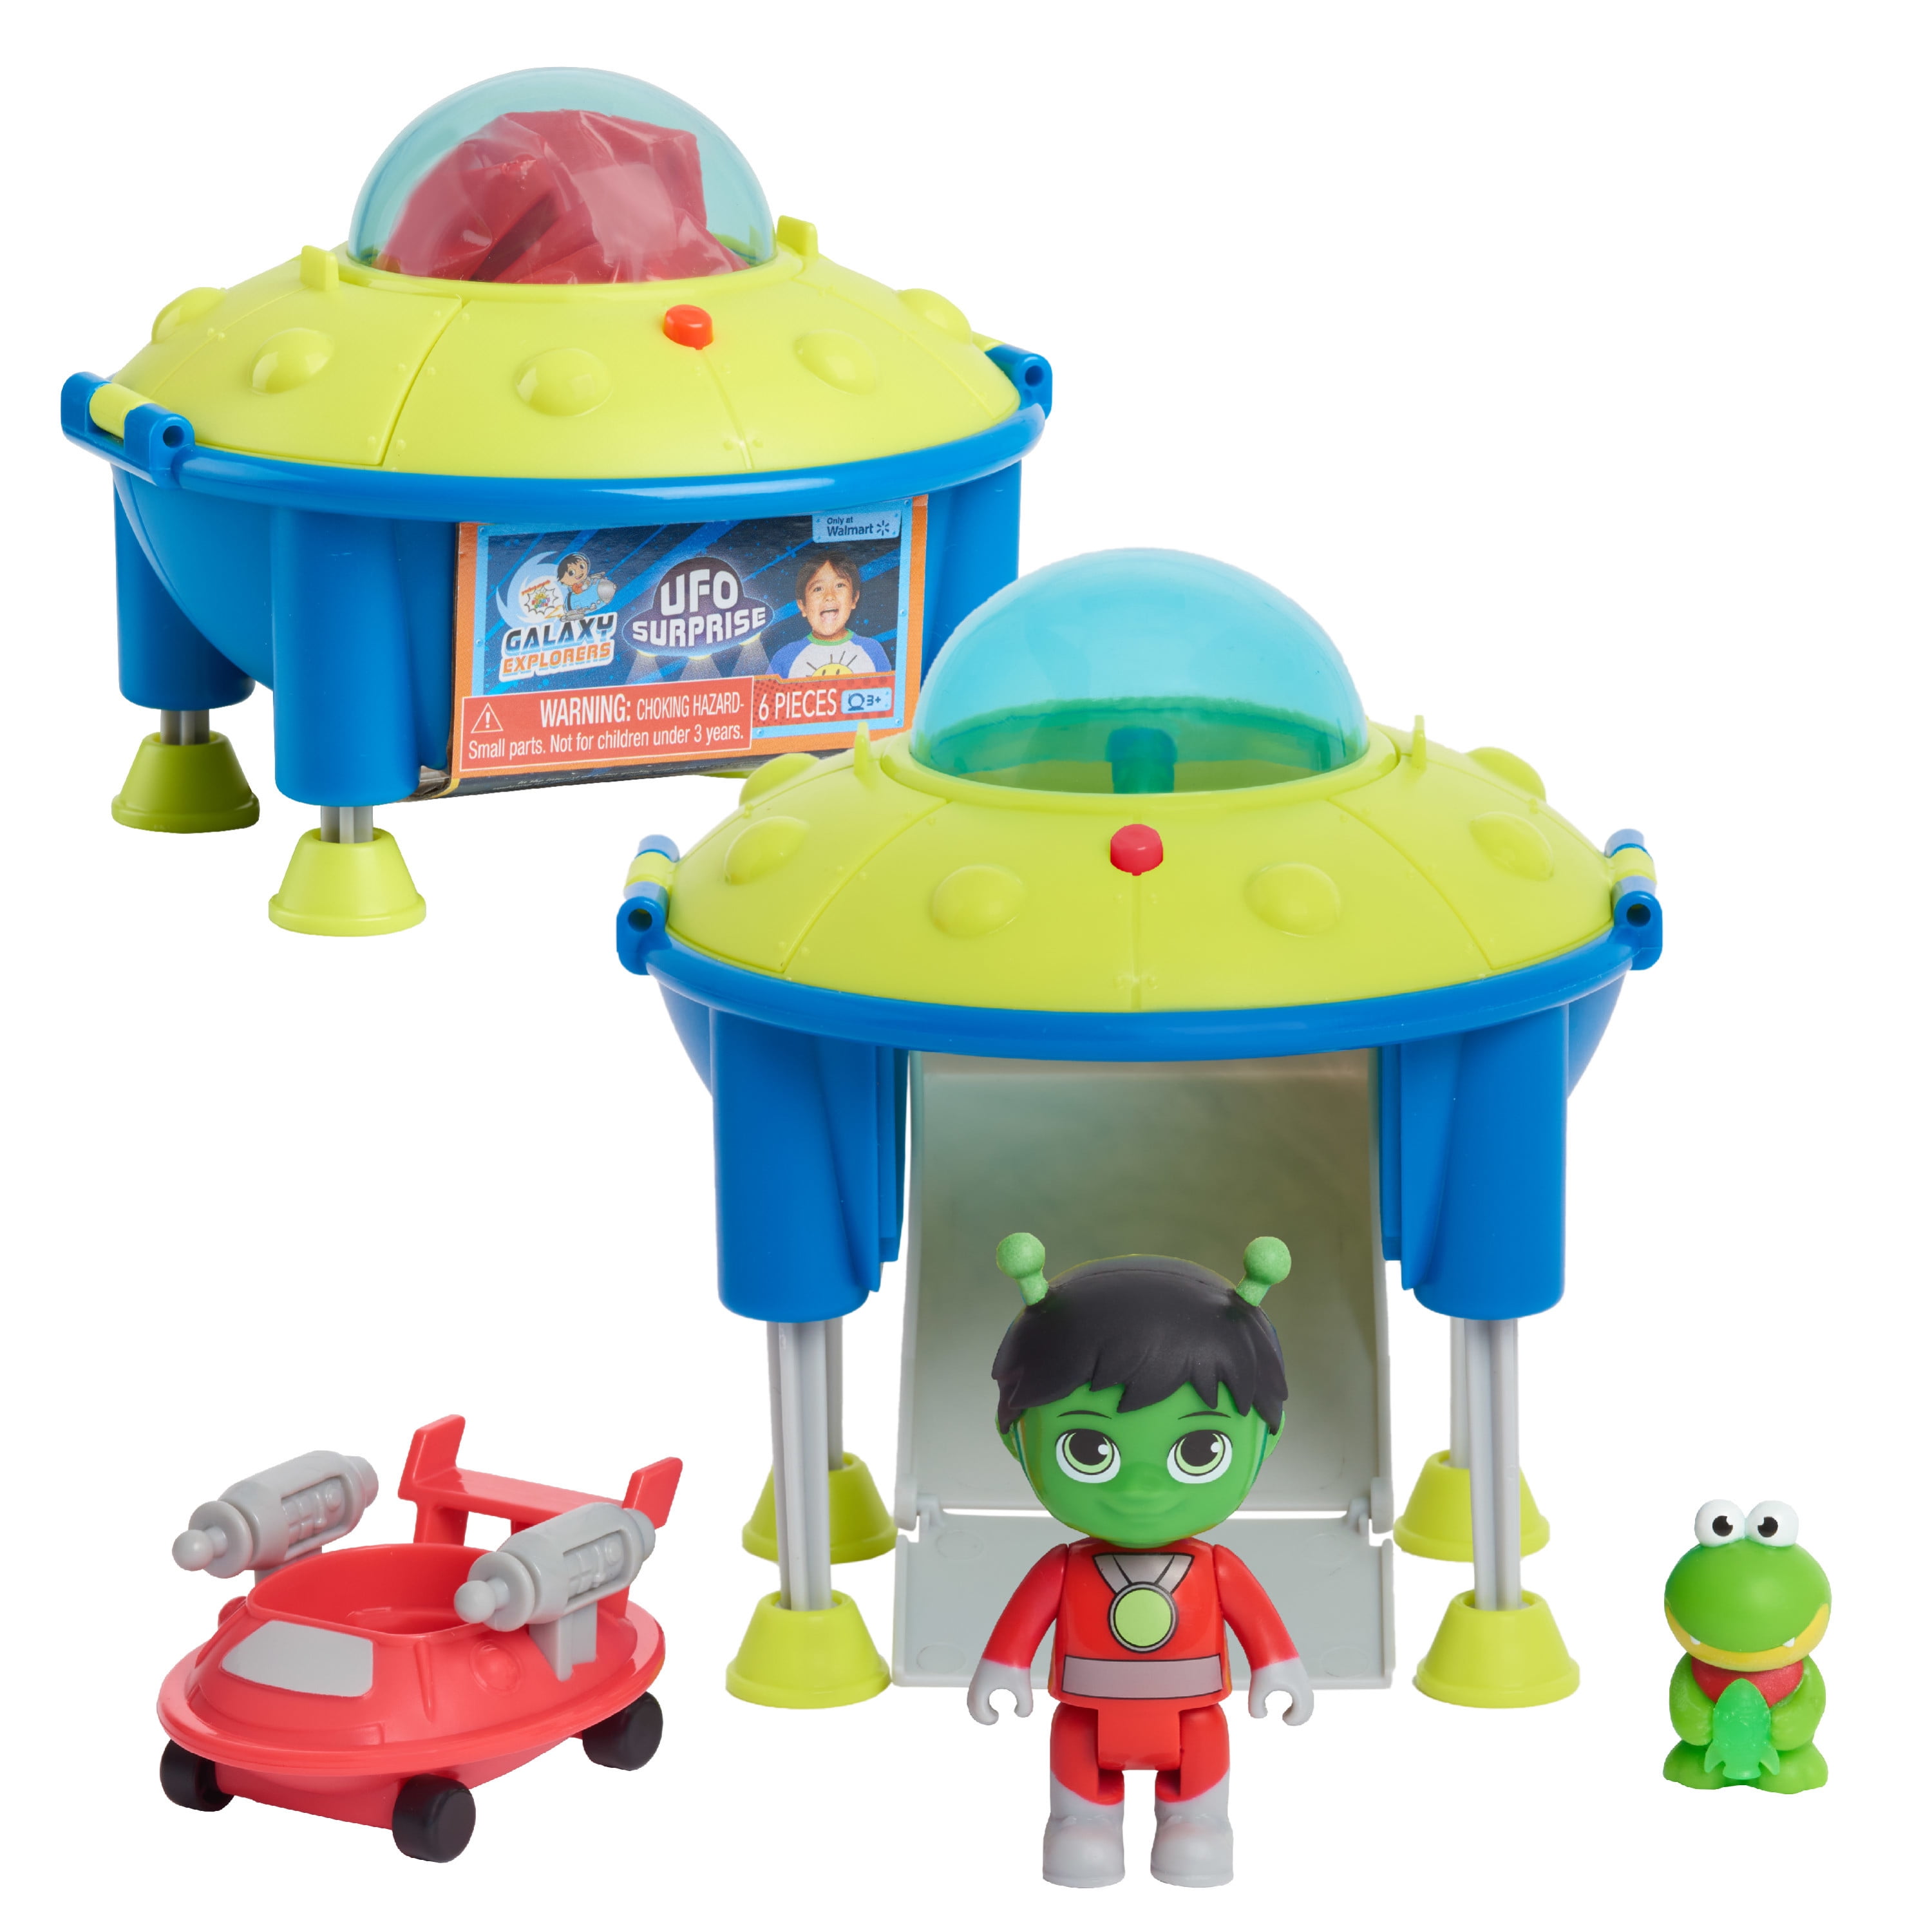 Ryan's World Galaxy Explorers Mini UFO Surprise, Figure and Vehicle Set,  Assortment, Styles May Vary, Kids Toys for Ages 3 Up, Gifts and Presents -  